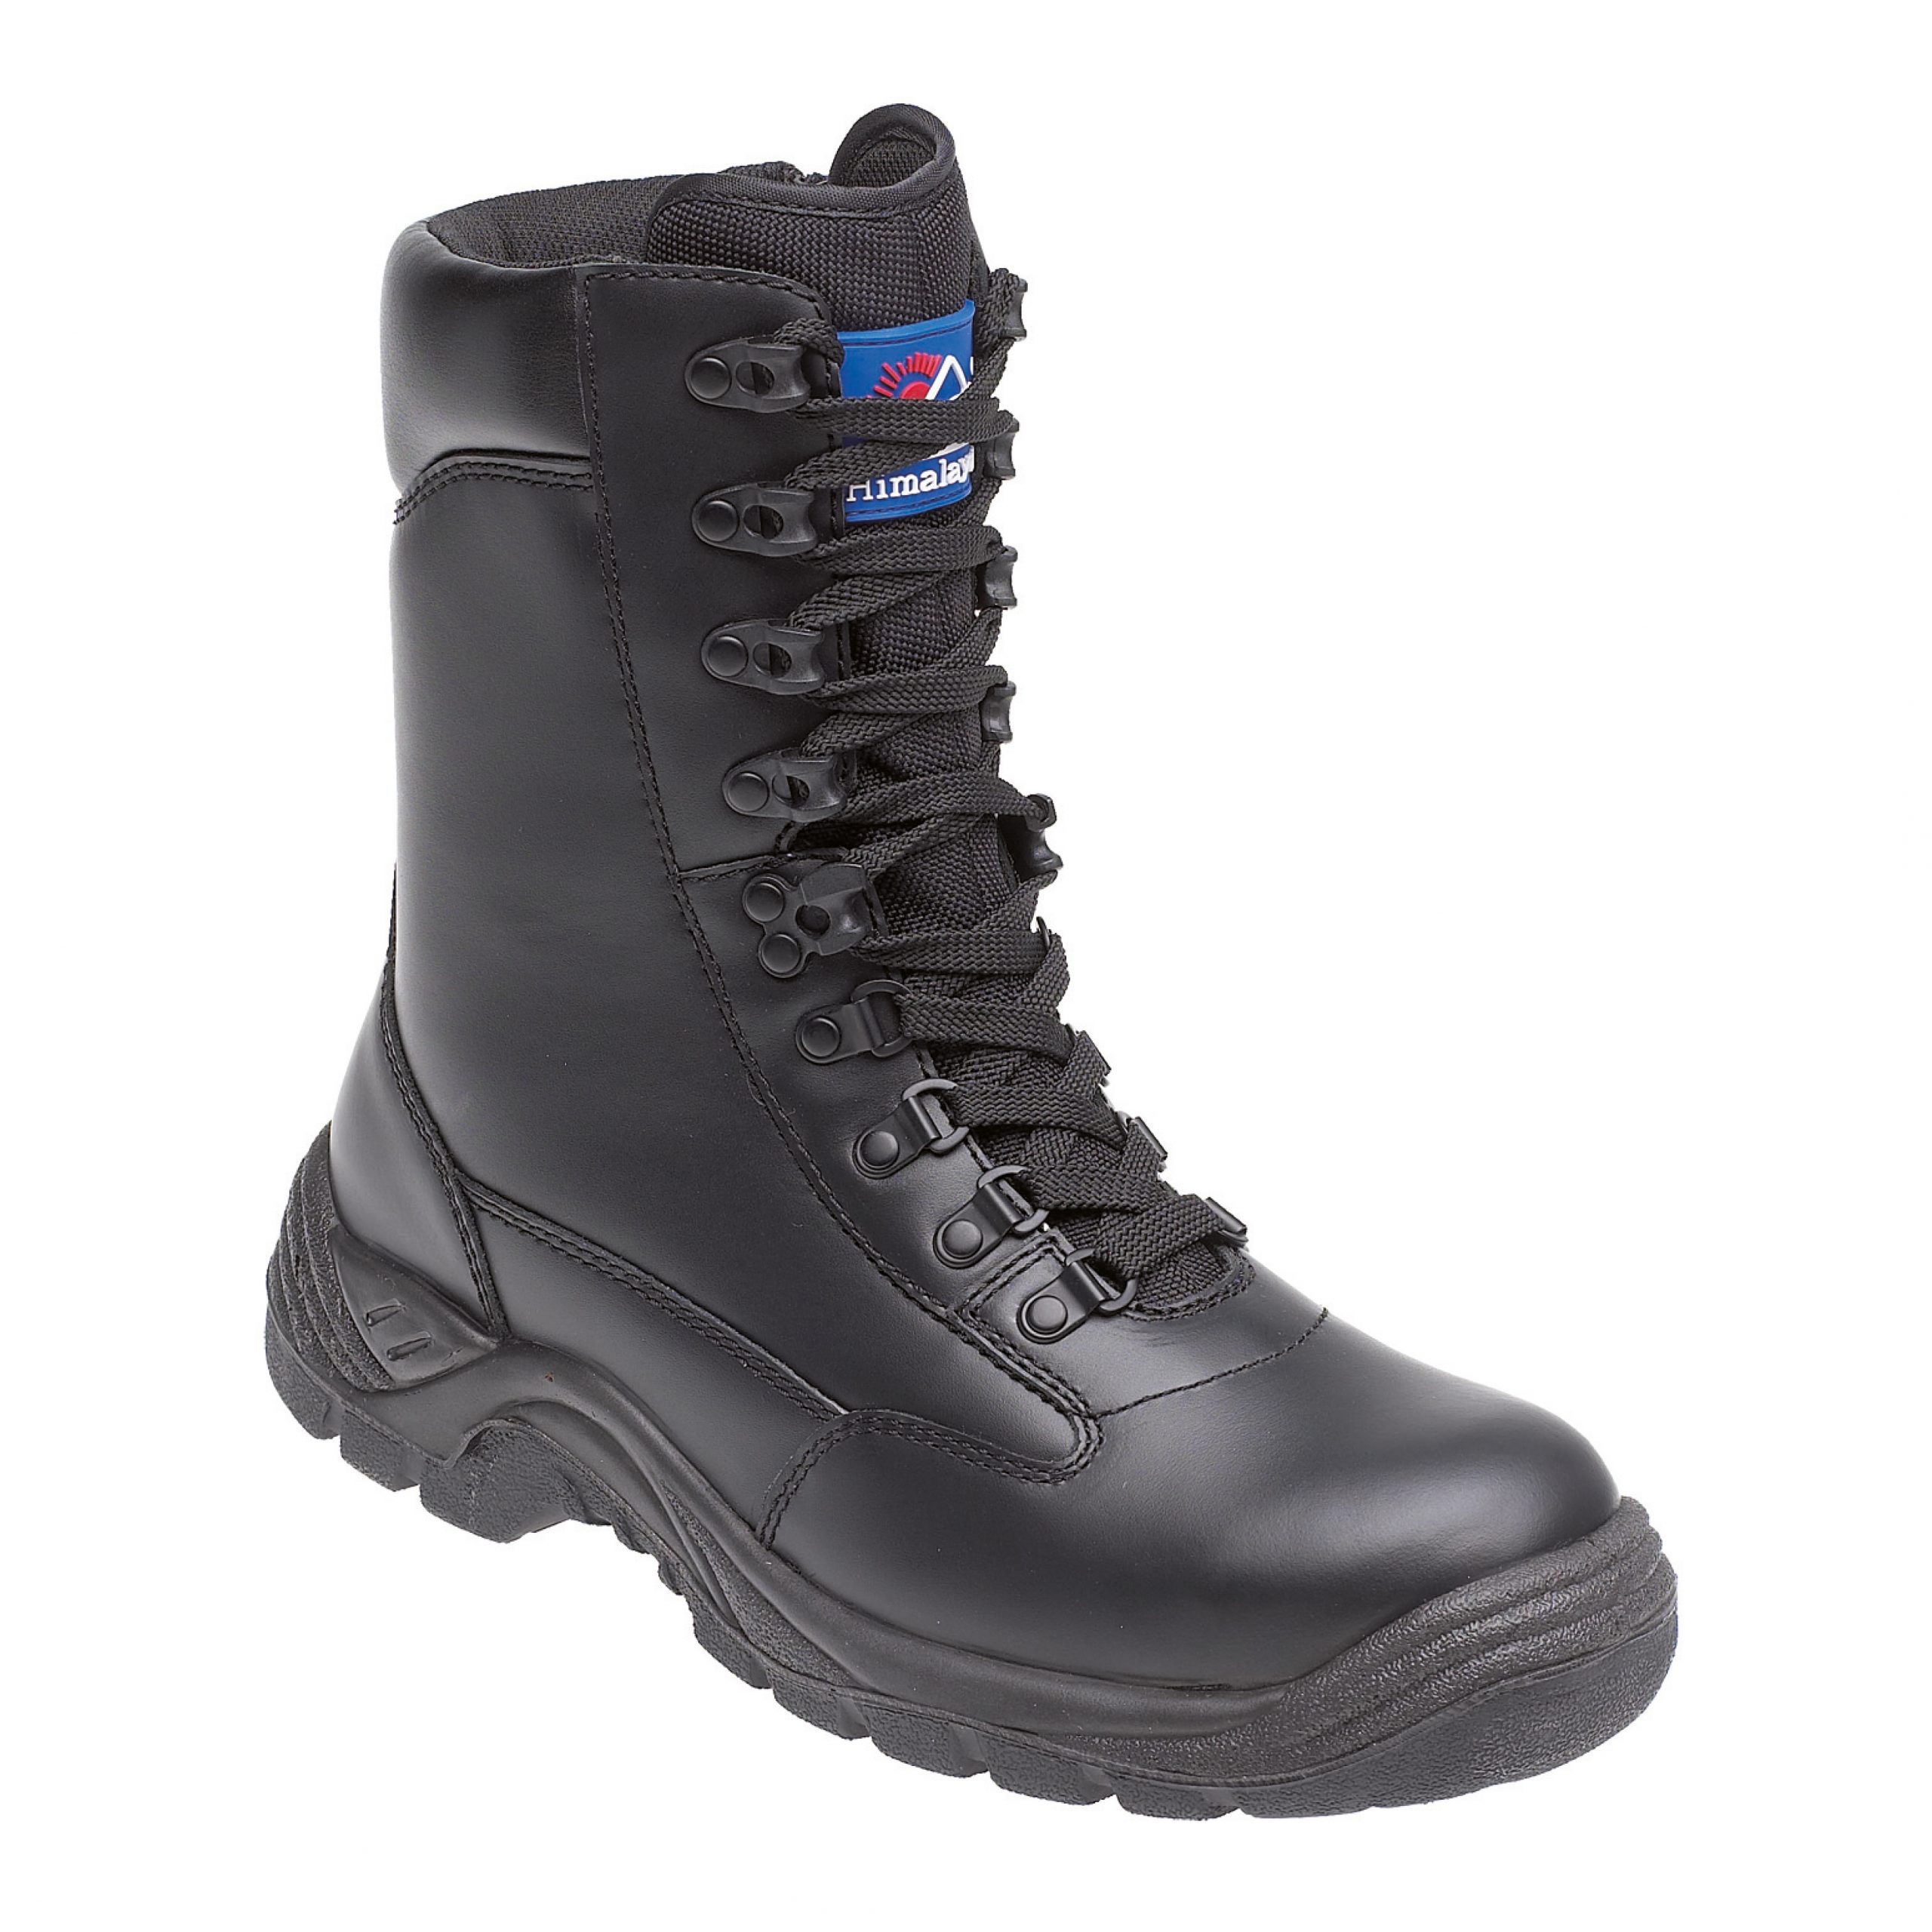 Himalayan 5060 S3 Black High Cut Utility Safety Boot with Side Zip